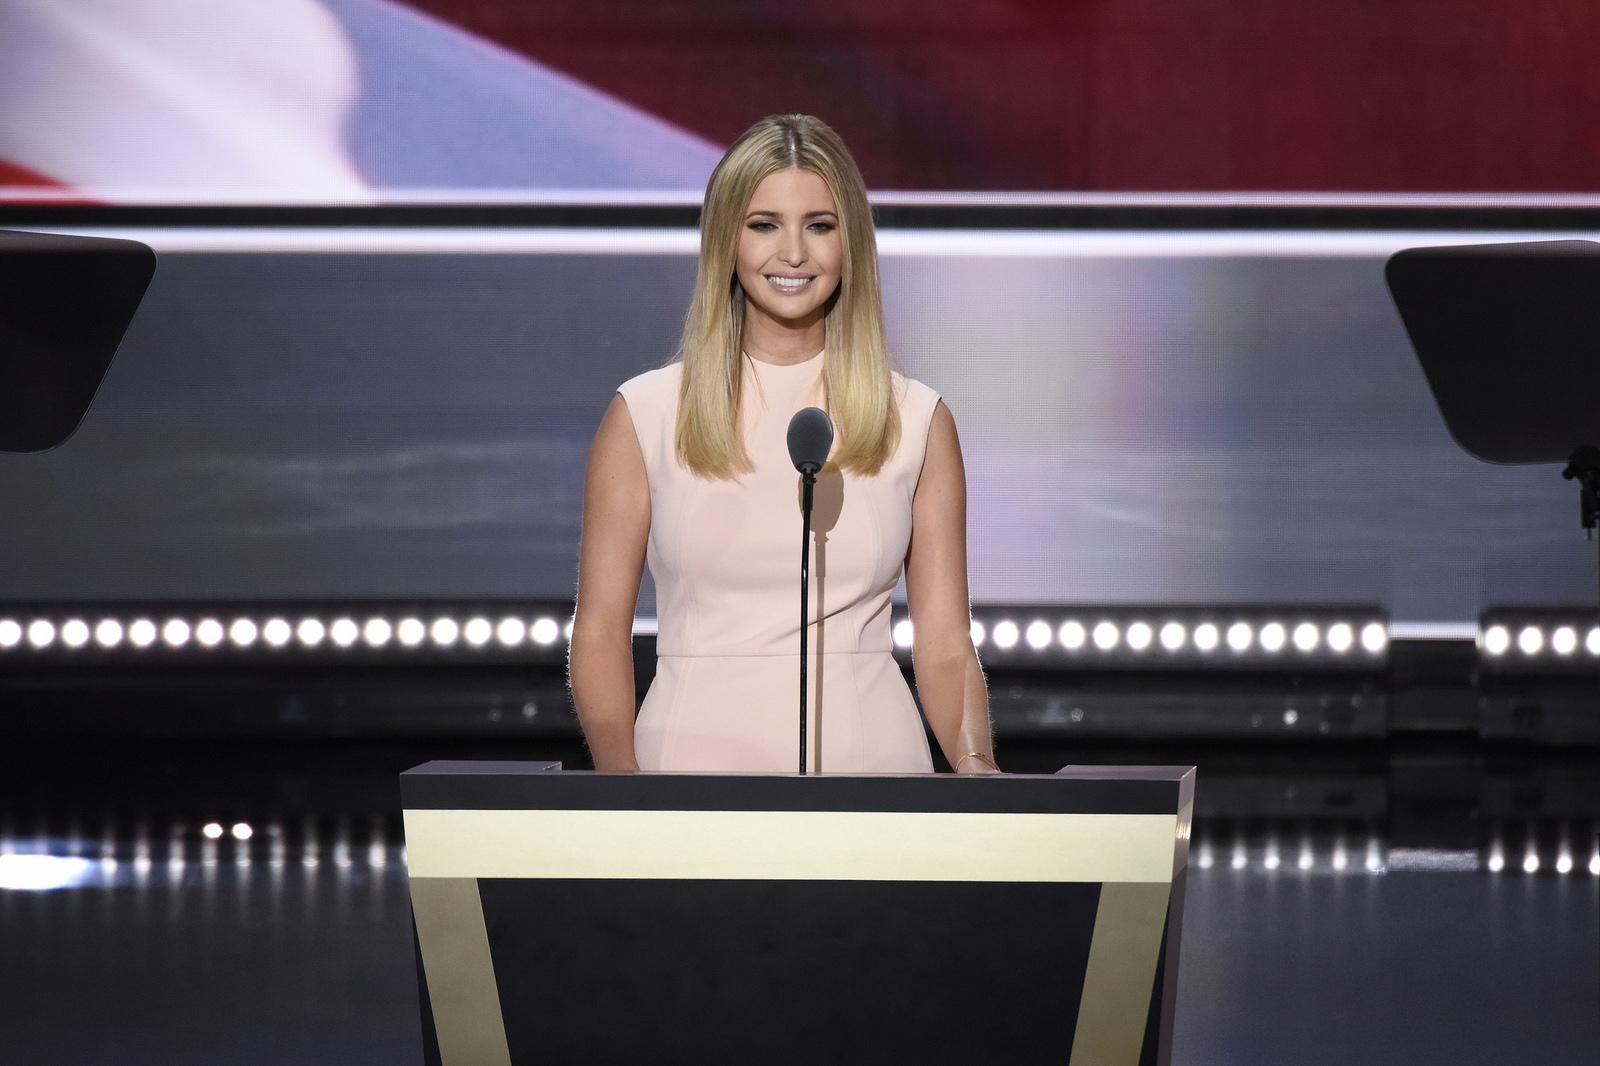 At the Republican National Convention in 2016, Ivanka Trump spoke about strides her father's administration would take towards furthering women's equality in the workplace. 